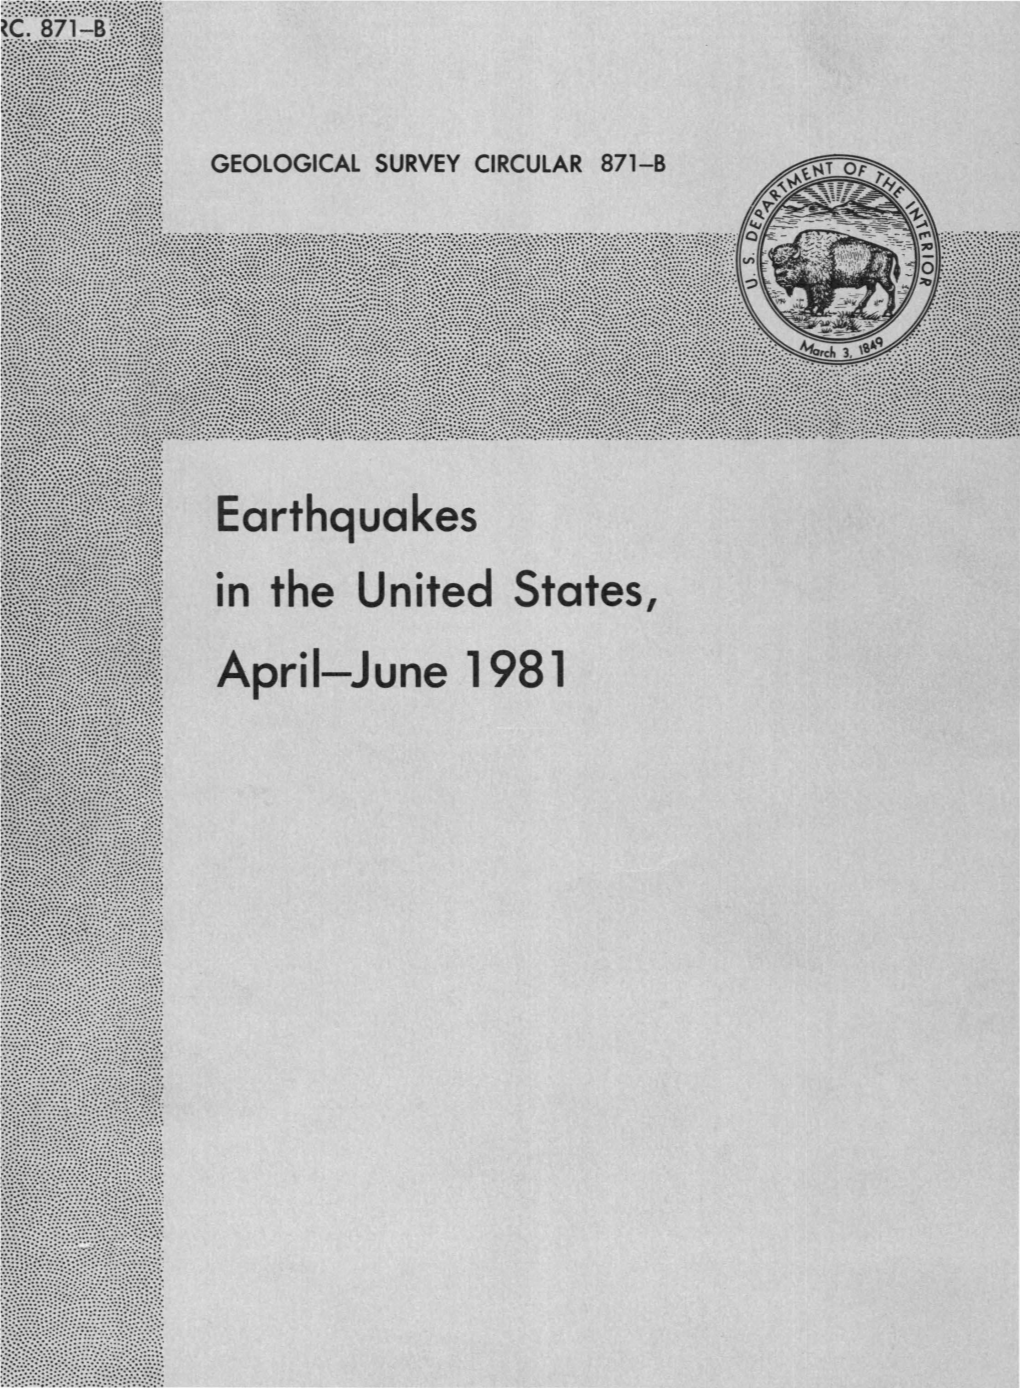 Earthquakes in the United States, April-June 1981